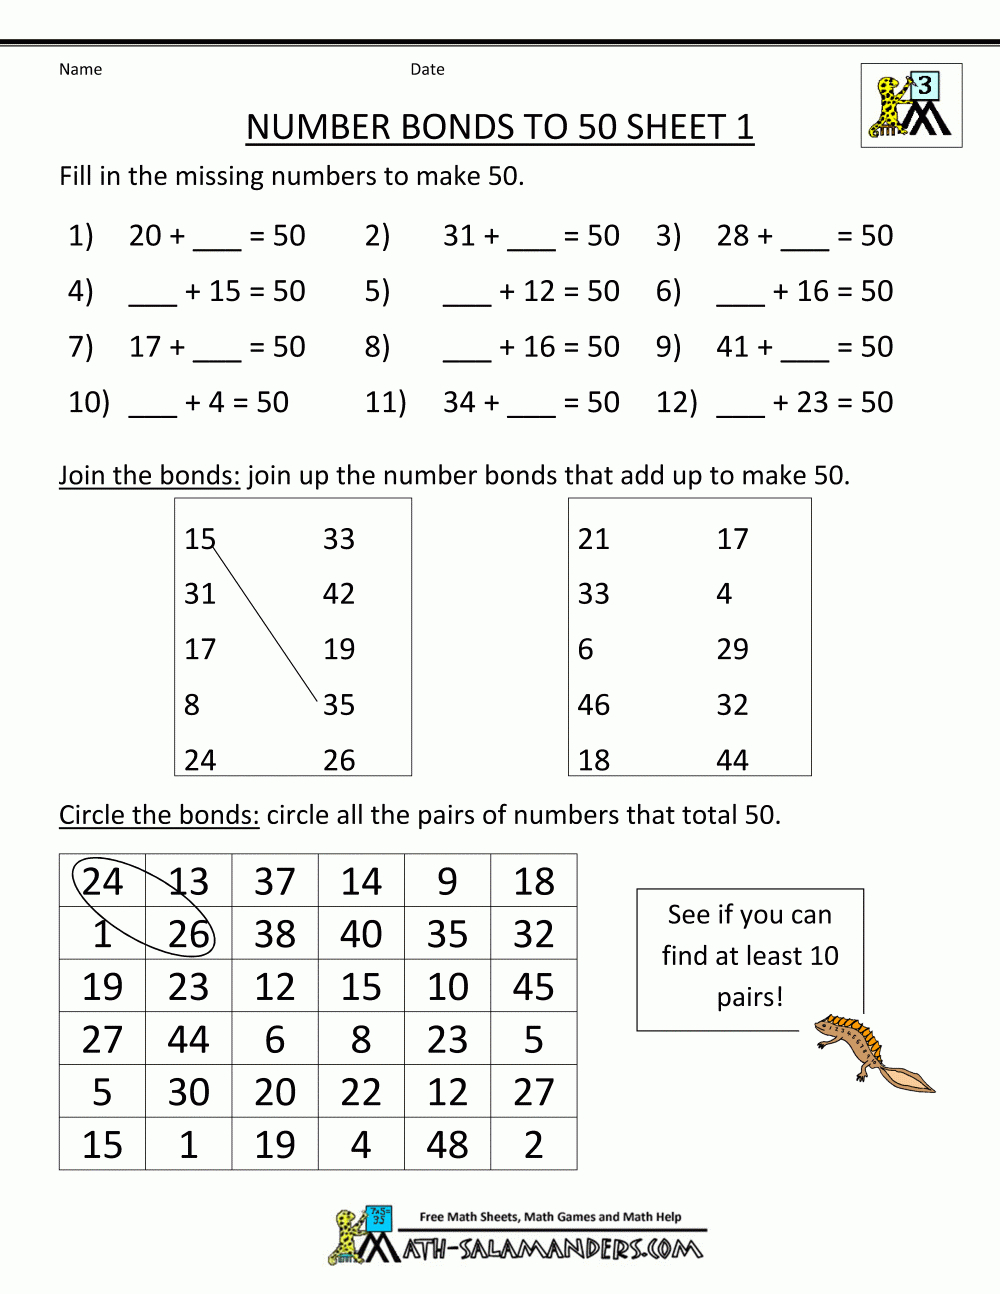 Free Math Worksheets Number Bonds To 50 1 | New | Kids Math - Free Printable Number Bonds Worksheets For Kindergarten